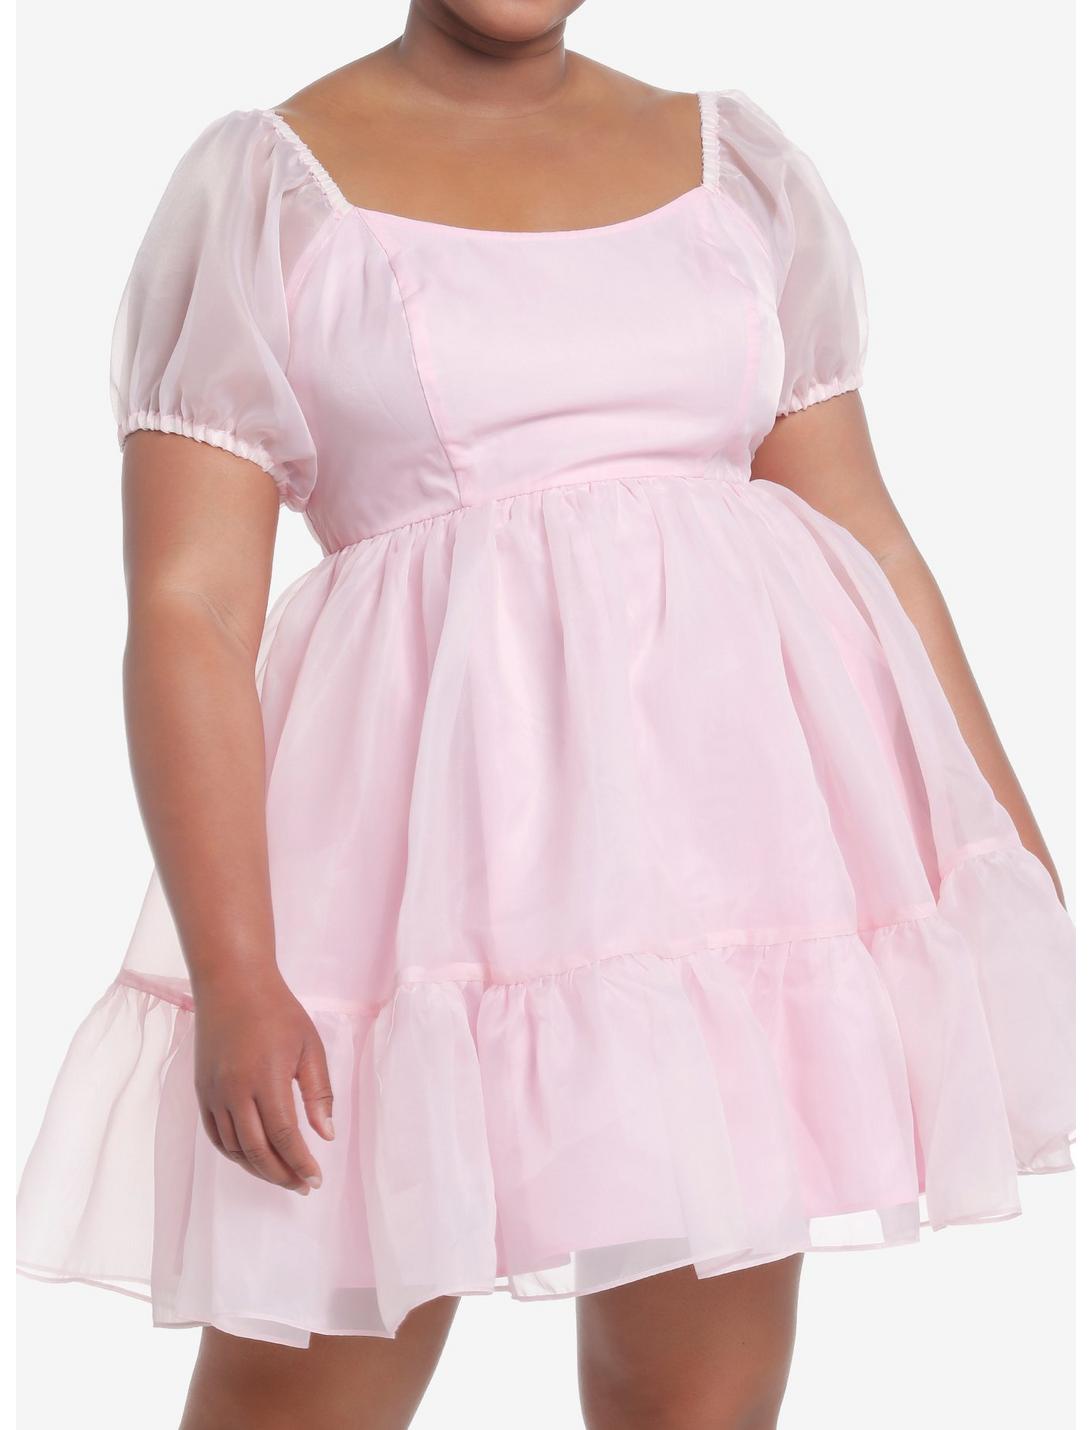 Sweet Society Pink Organza Tiered Dress Plus Size, PINK, hi-res